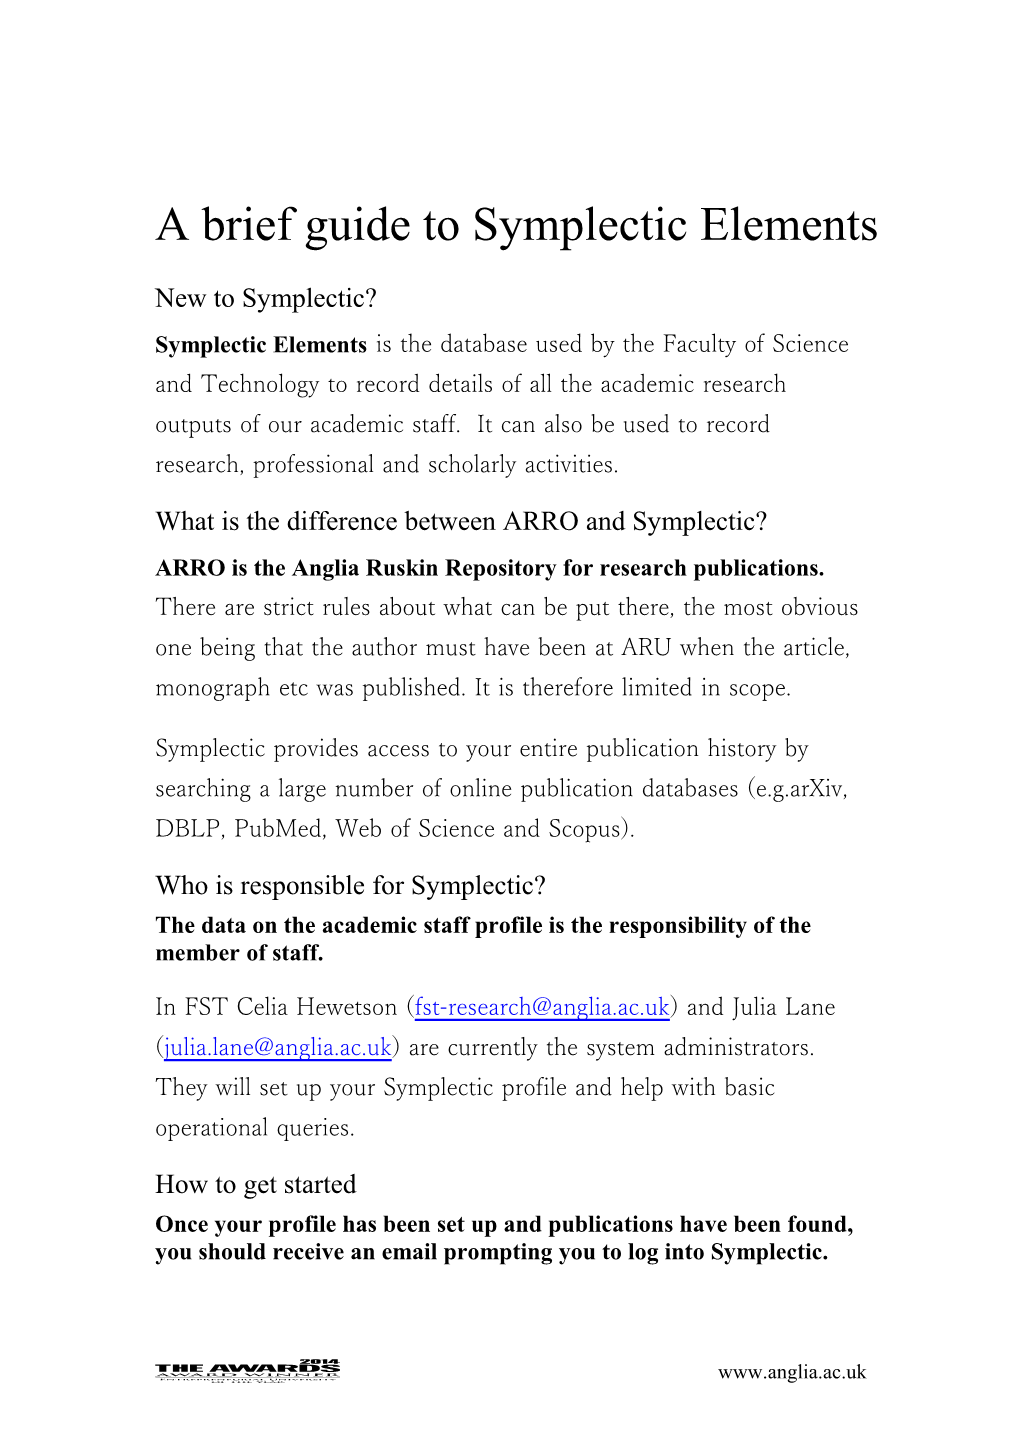 A Brief Guide to Symplectic Elements